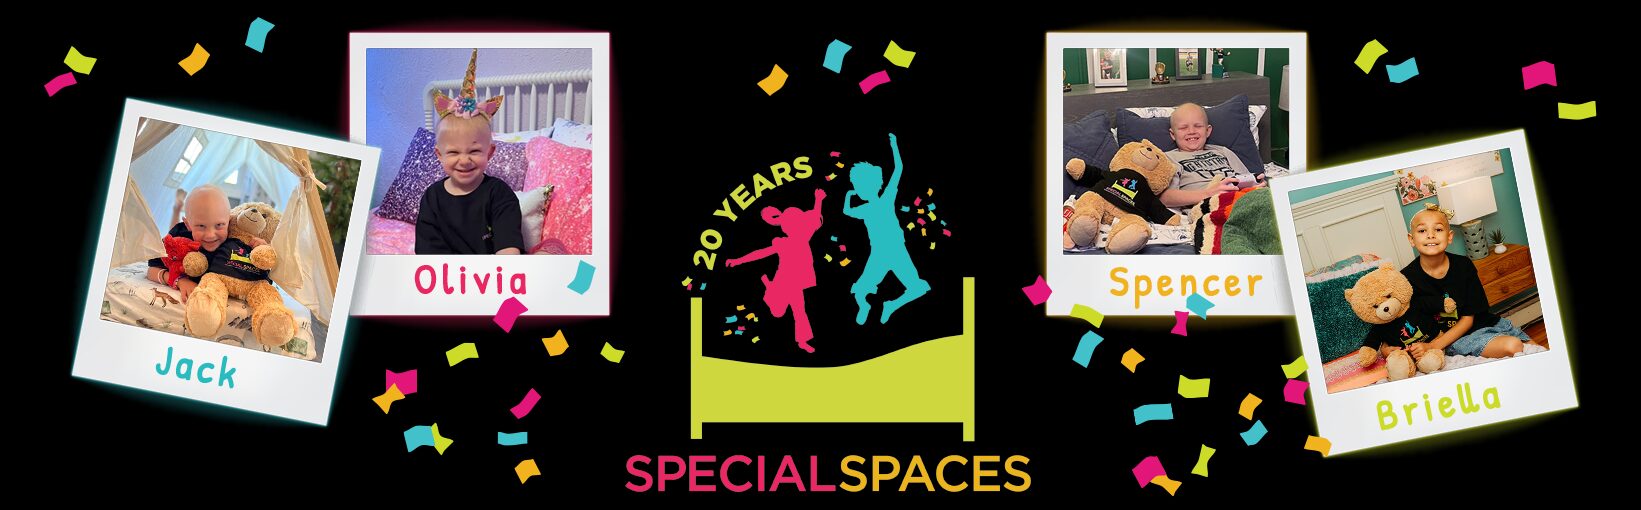 Special Spaces 20th Anniversary Celebration